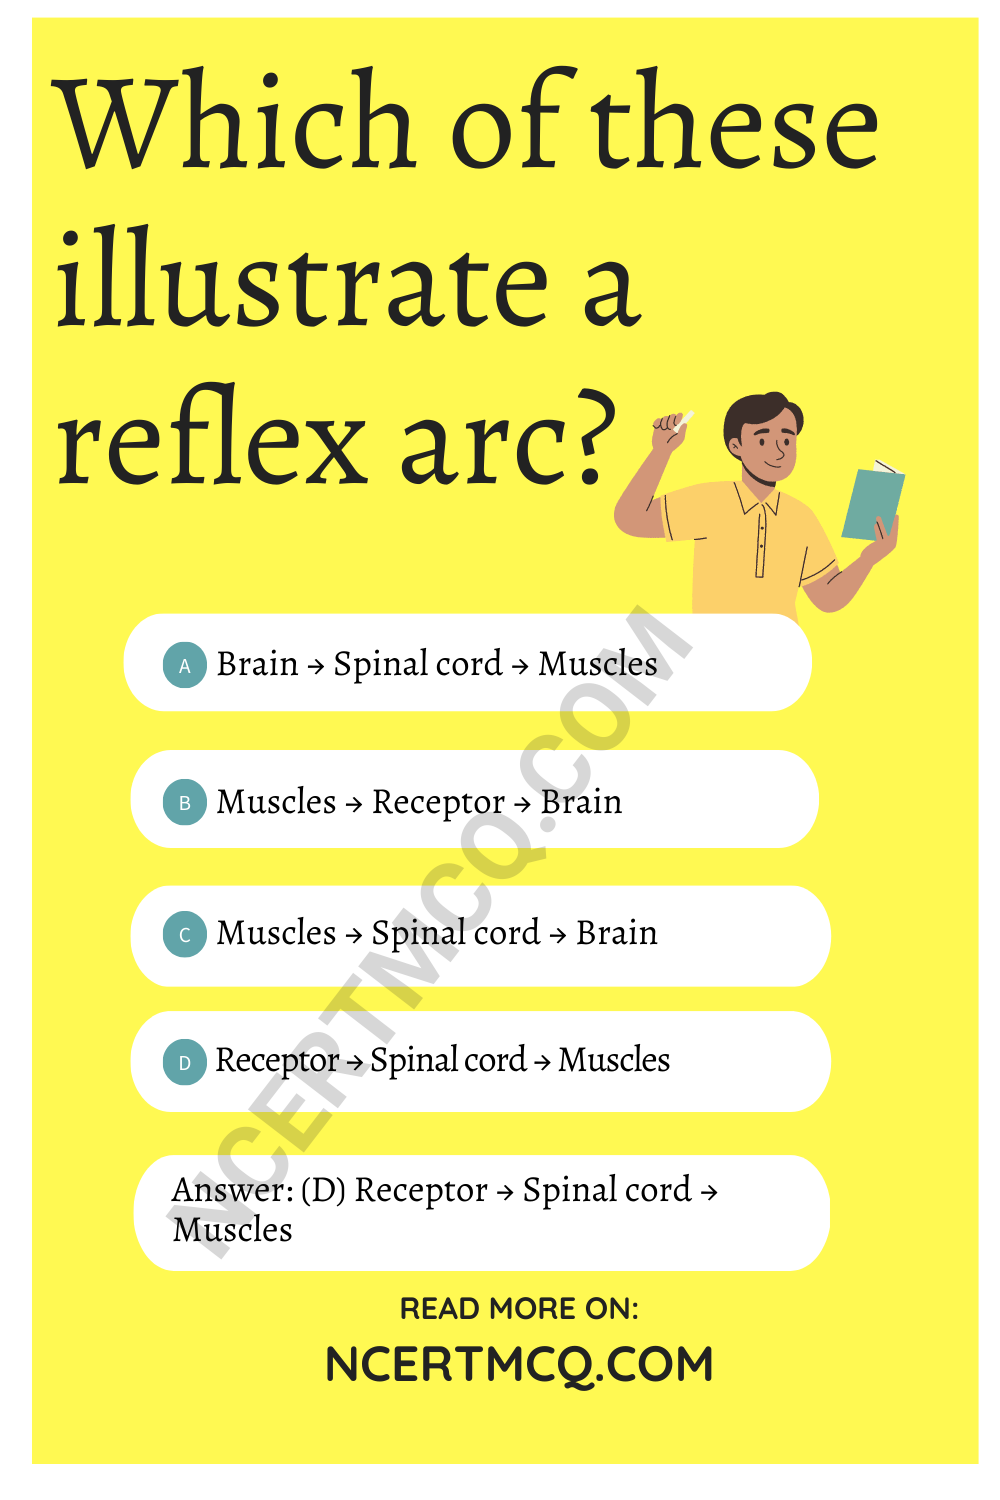 Which of these illustrate a reflex arc?